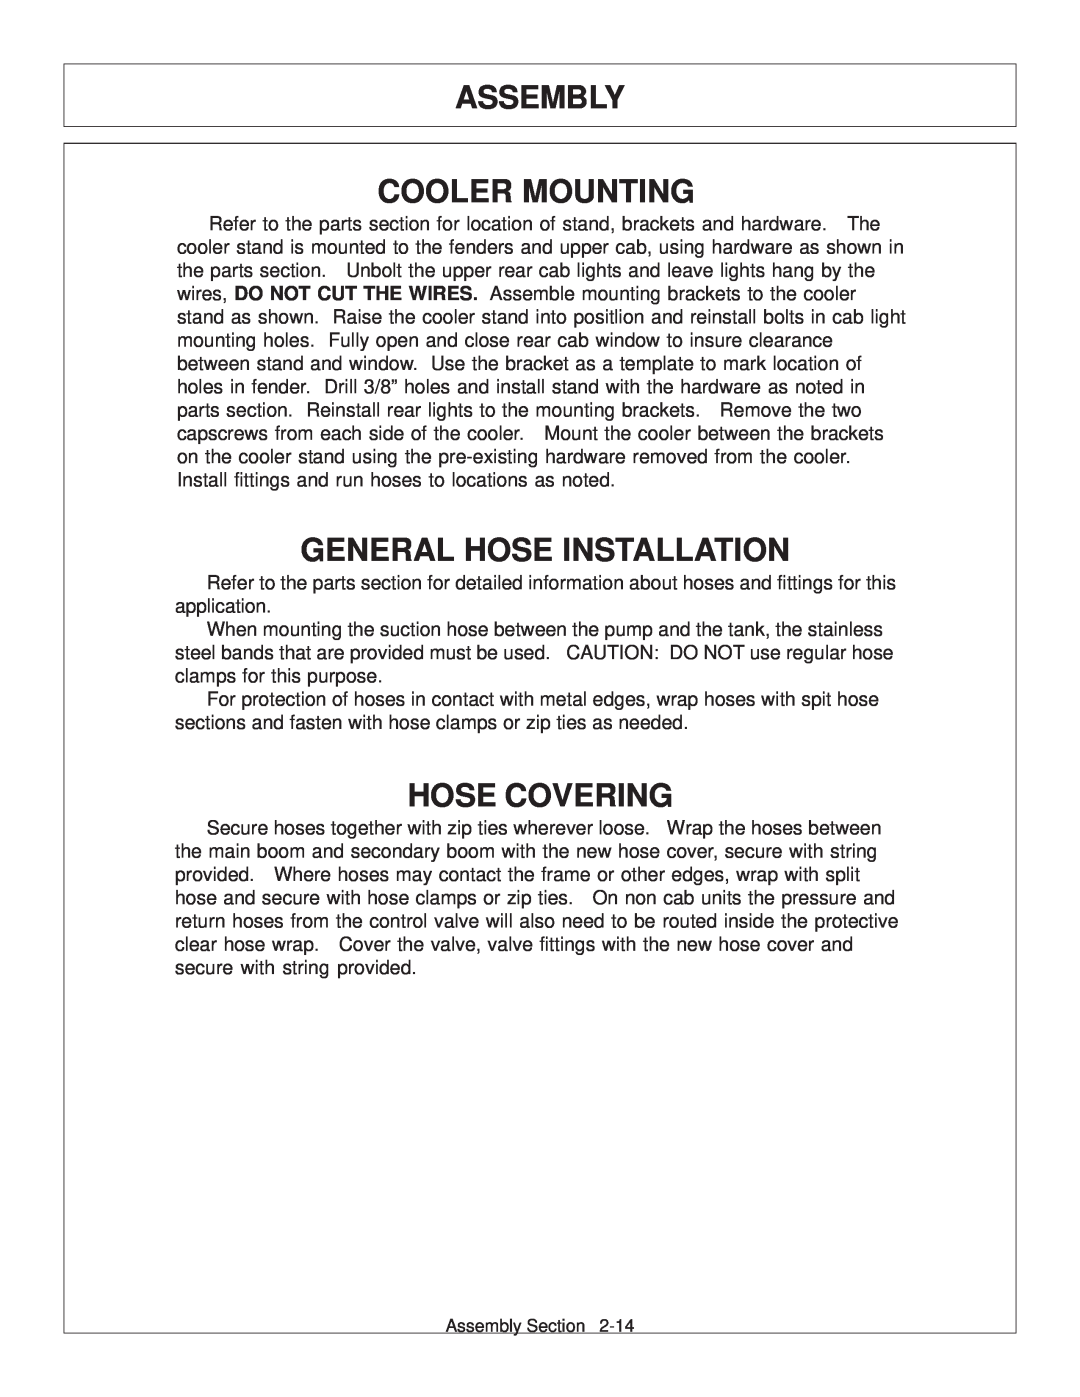 Tiger Products Co., Ltd JD 72-7520 manual Cooler Mounting, General Hose Installation, Hose Covering, Assembly 